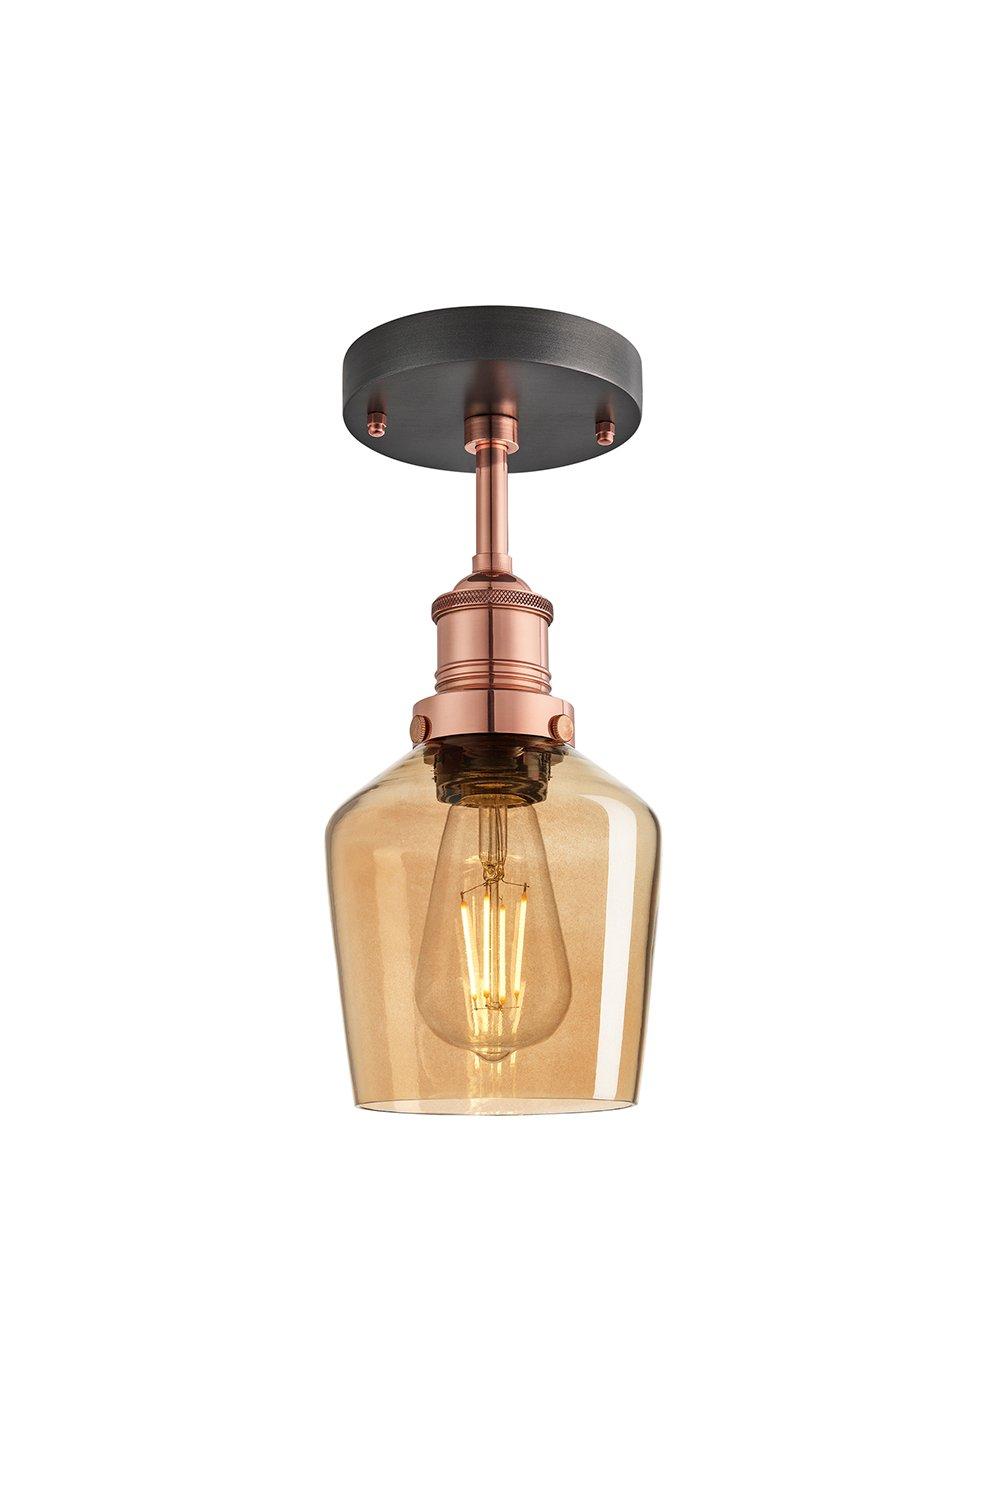 Brooklyn Tinted Glass Schoolhouse Flush Mount, 5.5 Inch, Amber, Copper Holder